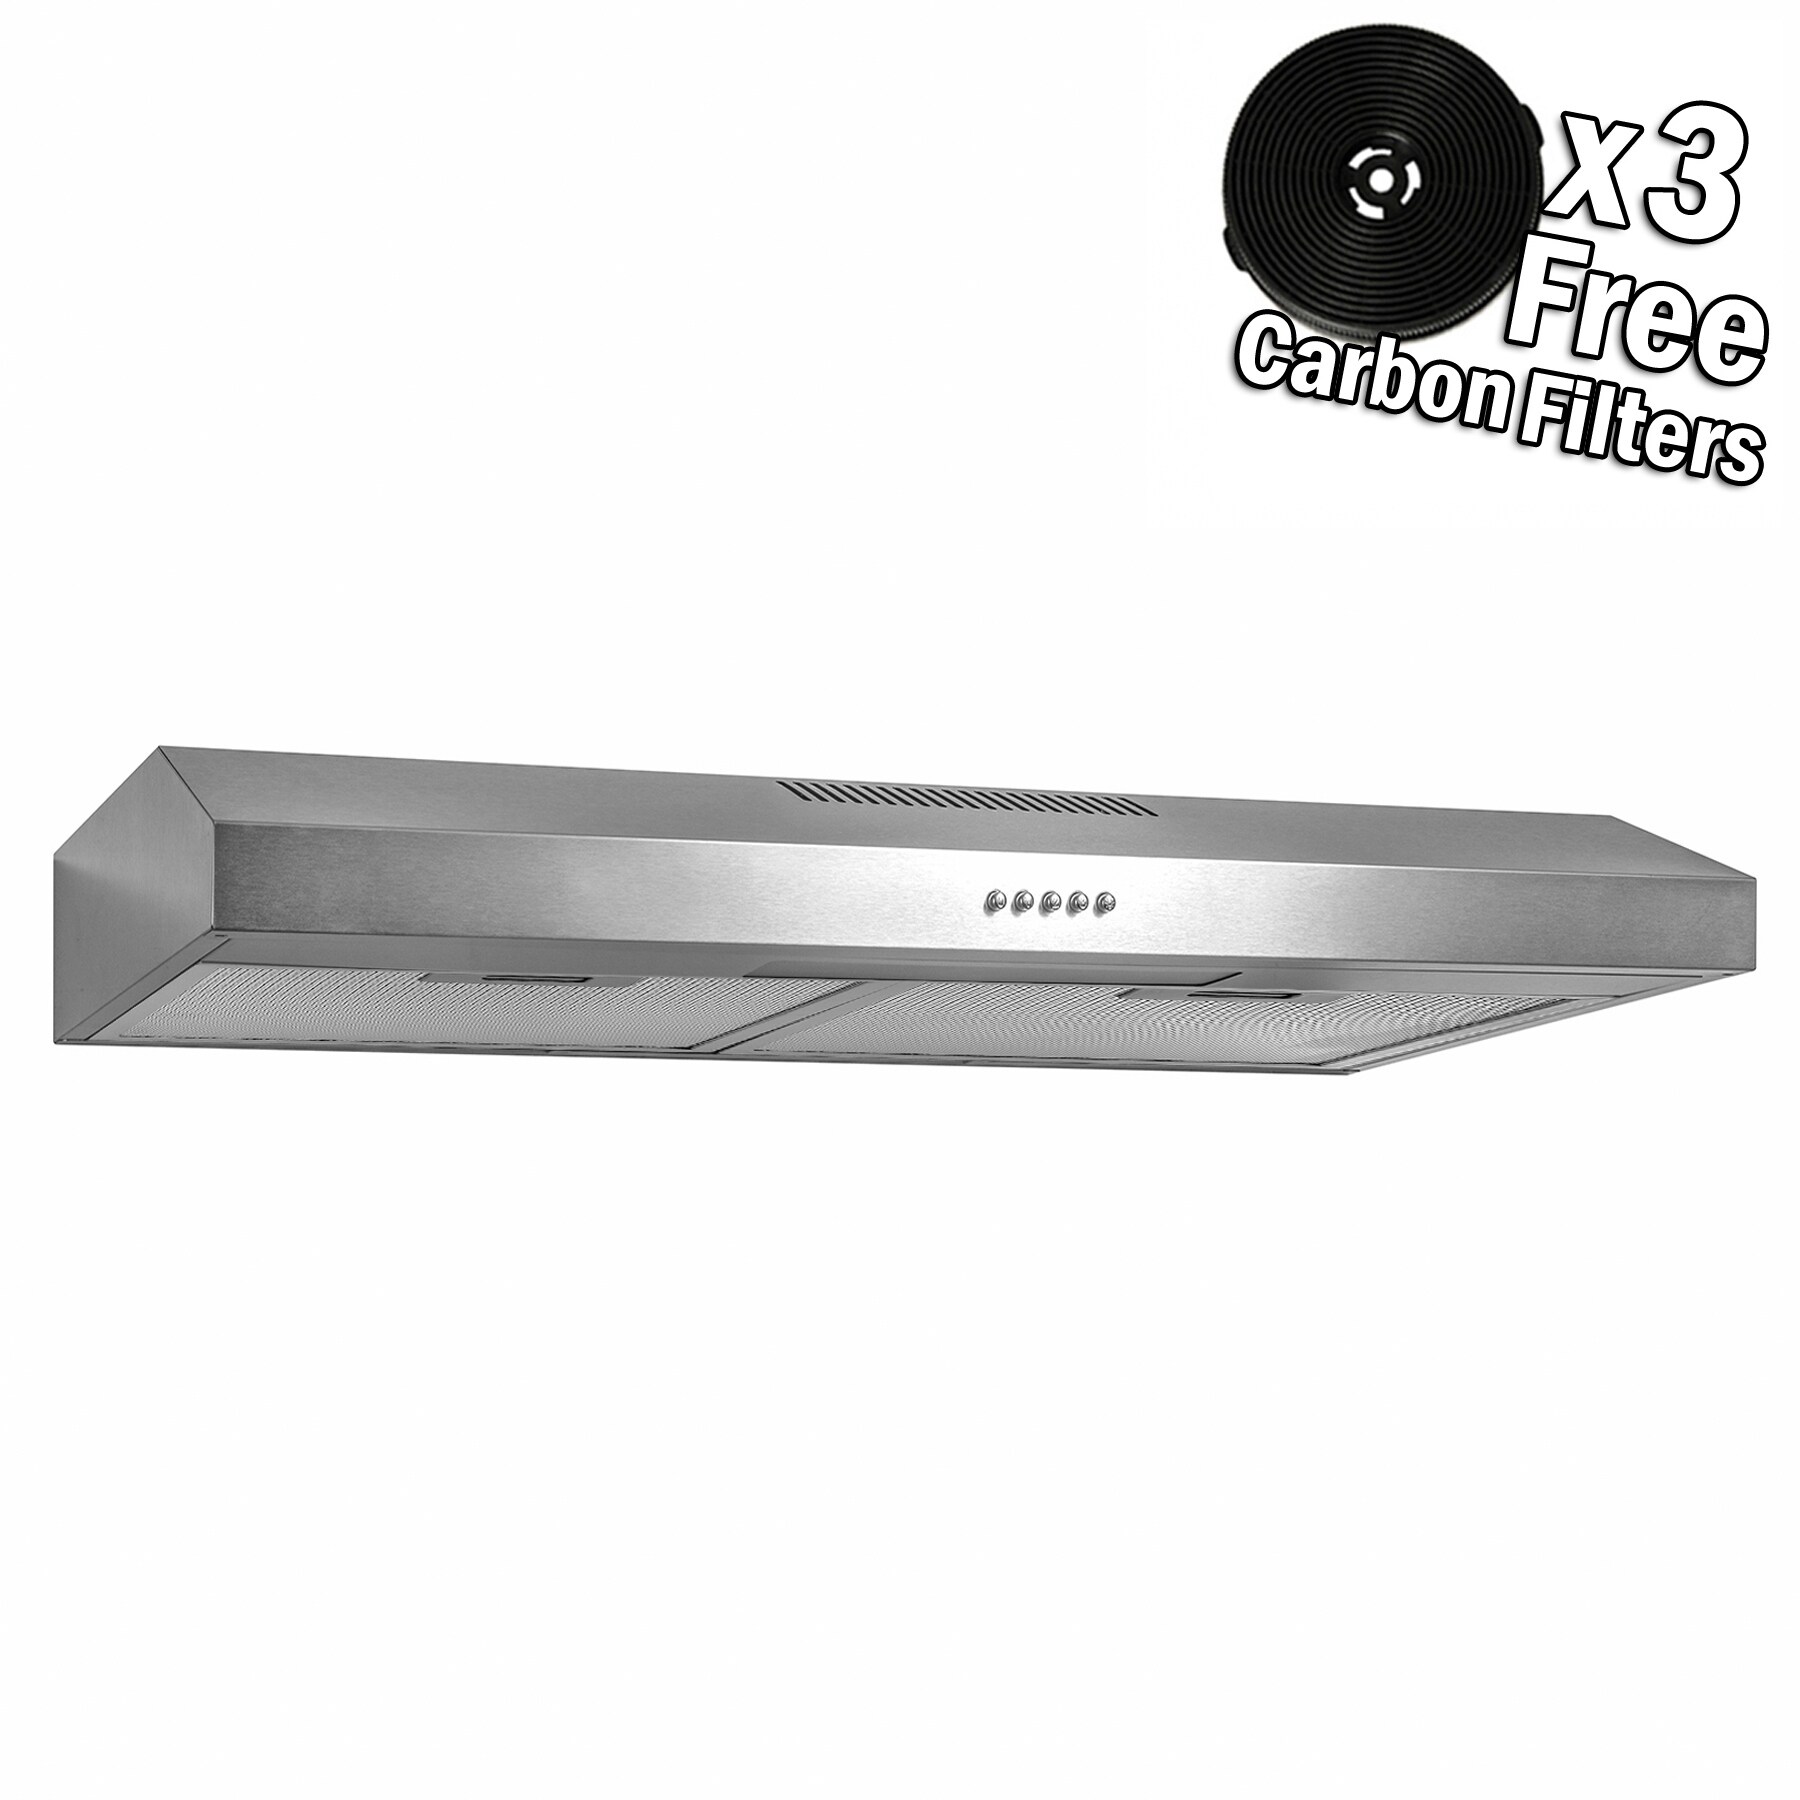 AKDY 24 Under Cabinet Stainless Steel Push Panel Kitchen Range Hood Cooking Fan w/Carbon Filters … 24